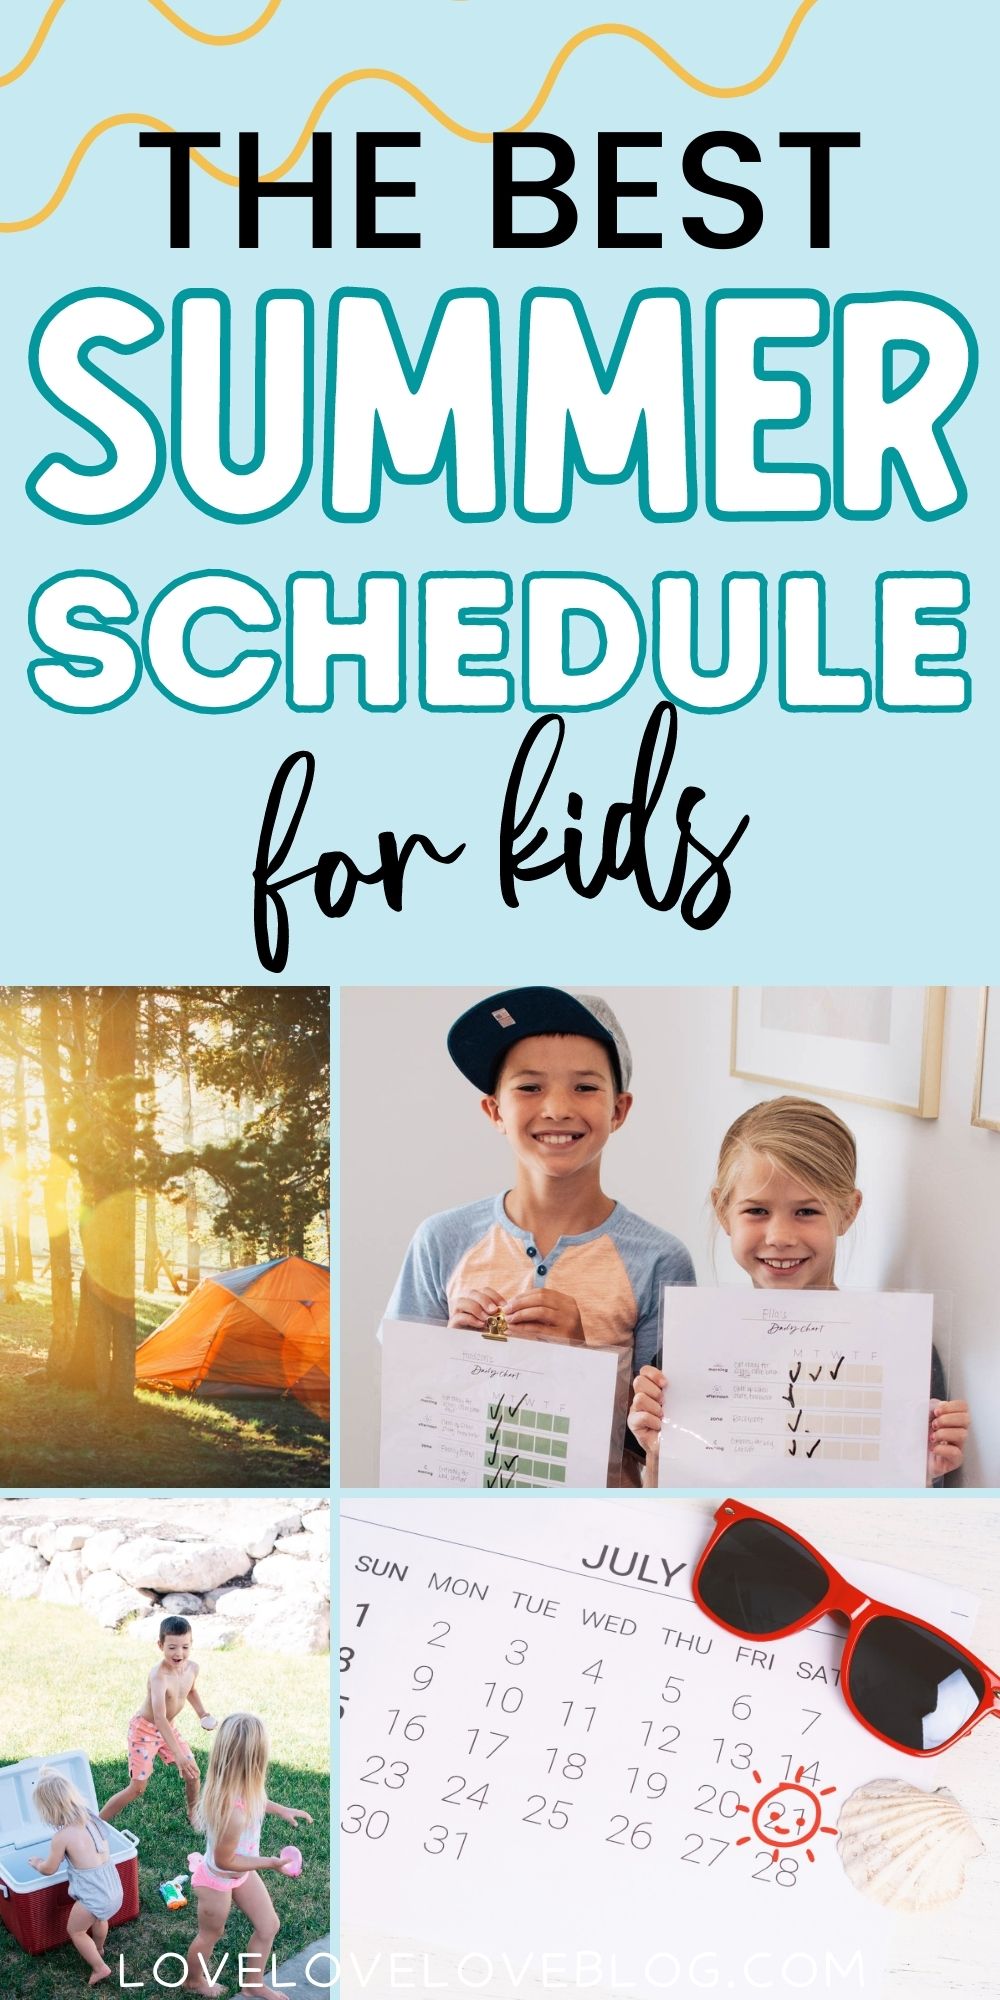 Pinterest graphic with text design and collage of photos depicting summer schedules for kids.